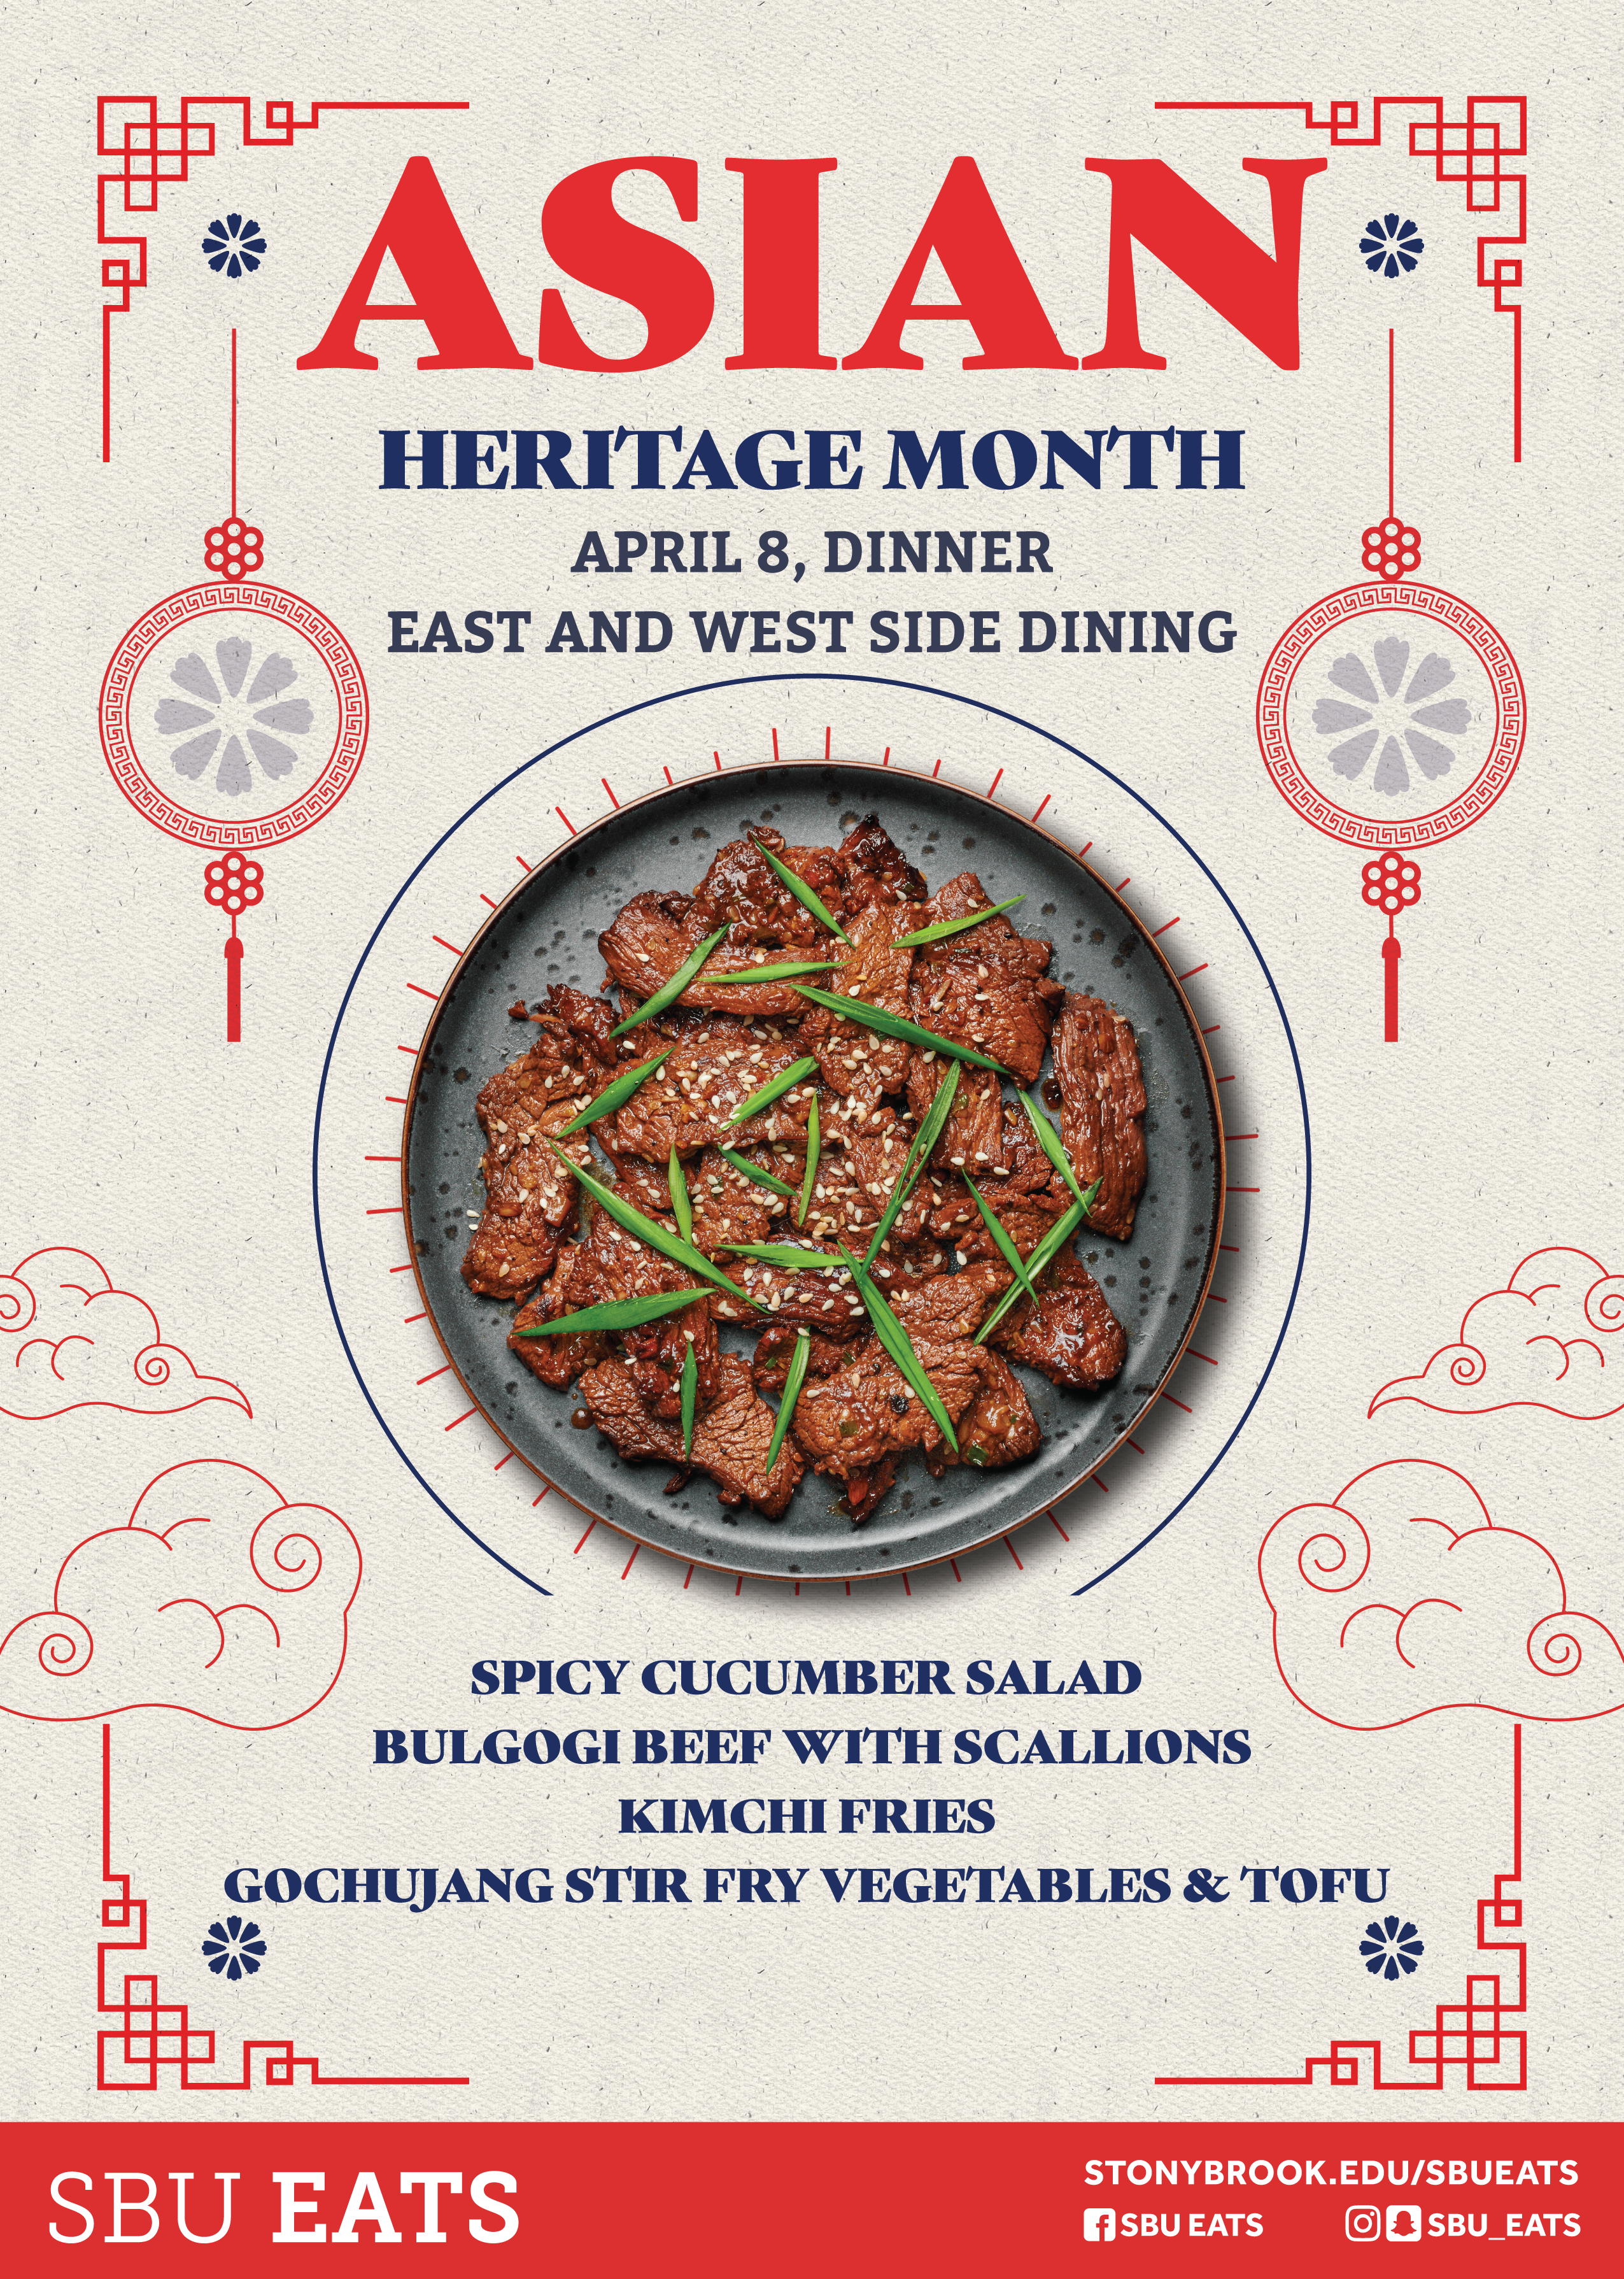 Flyer of Korean cuisine available at East and West Dining